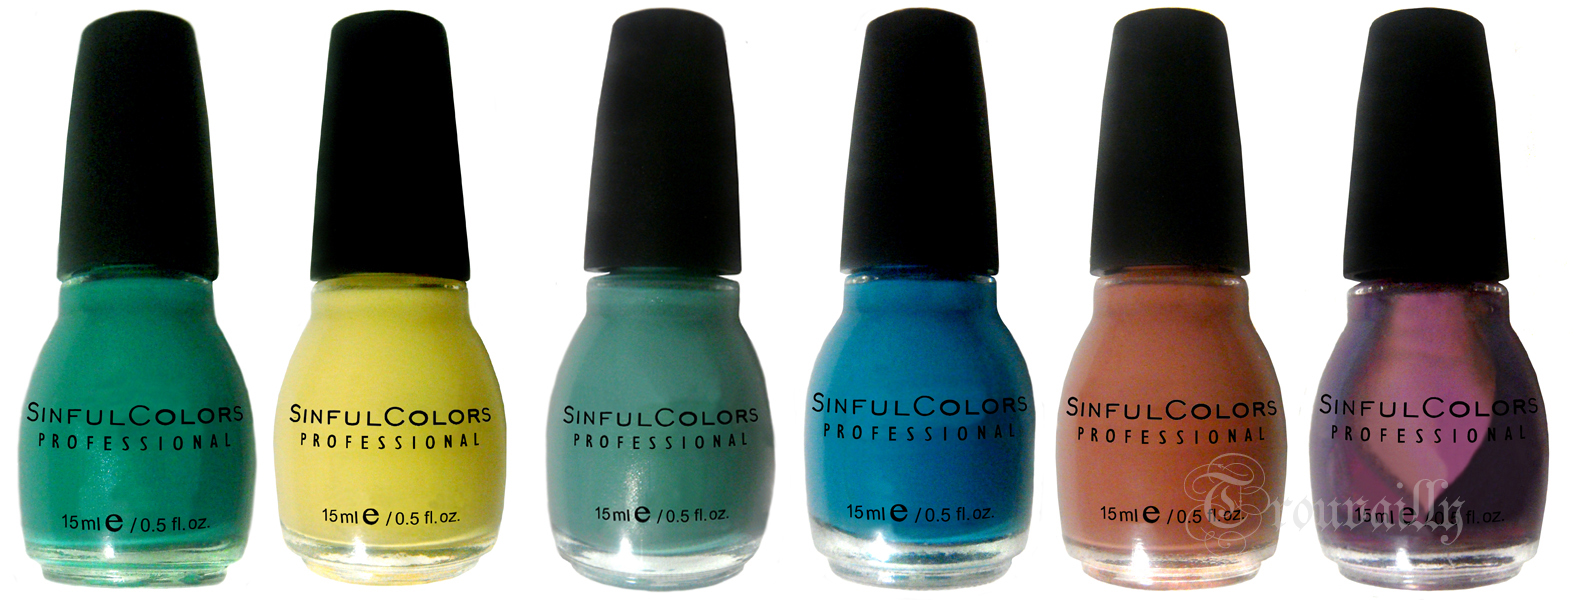 8. Sinful Colors Professional Nail Polish - Endless Blue - wide 8